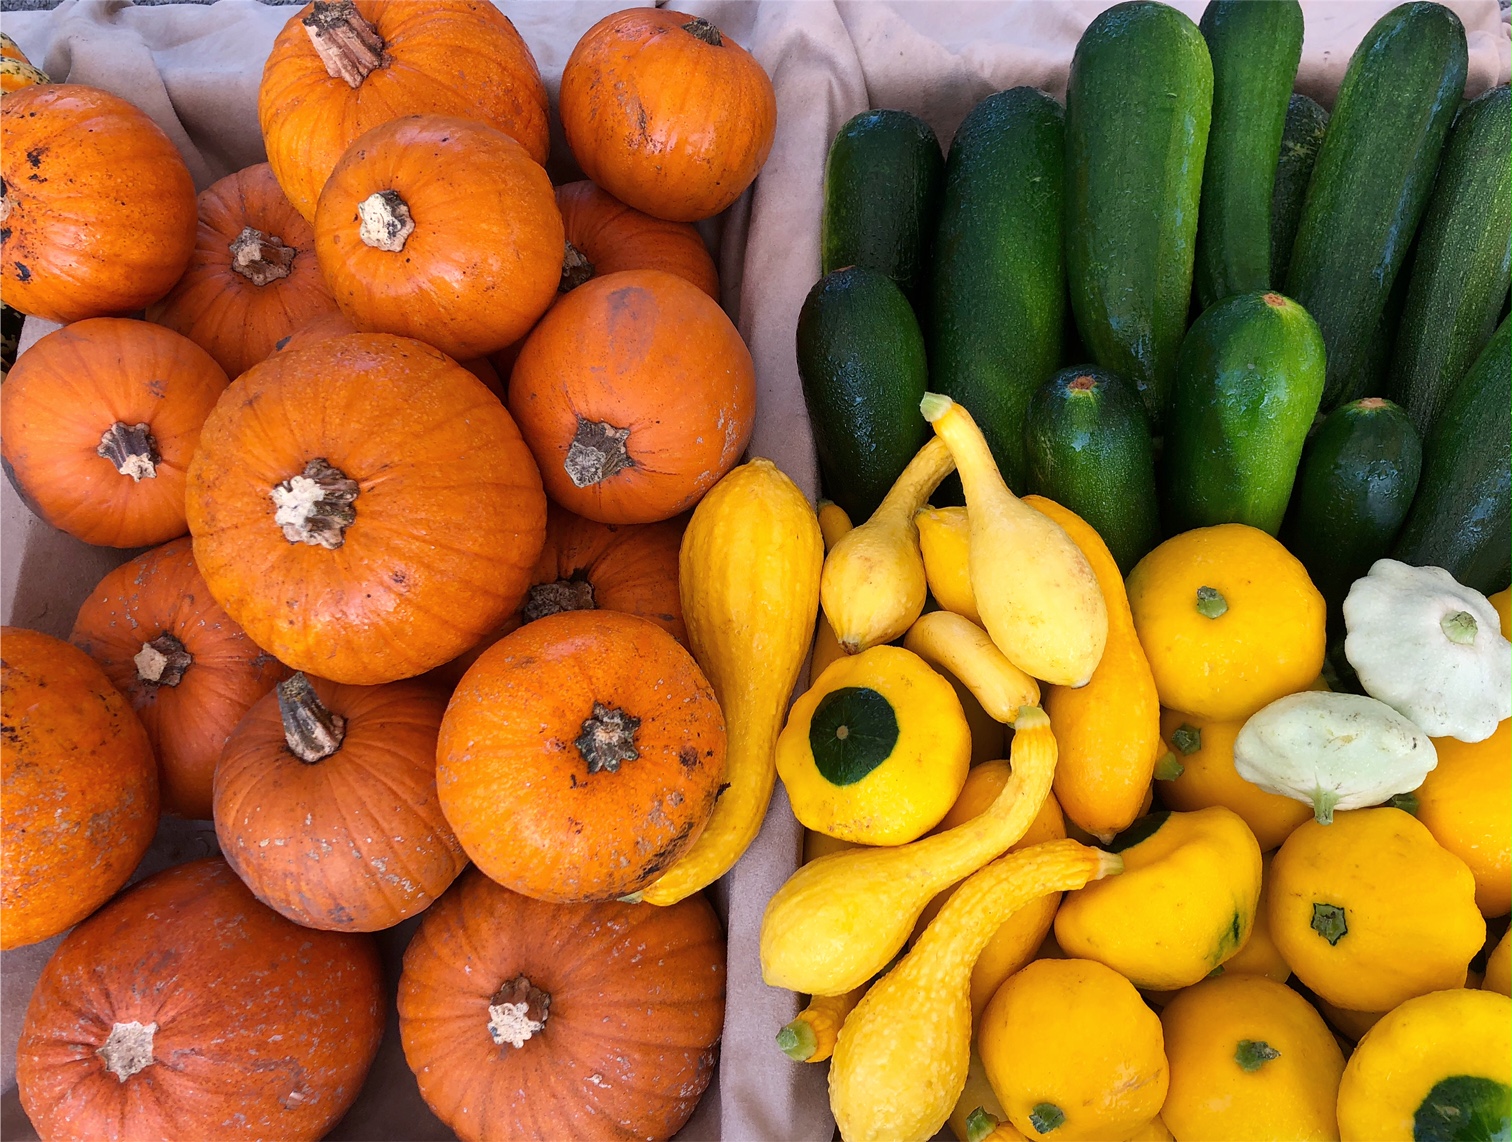 An overhead photo shows pumpkins in one burlap lined basket beside another basket of yellow squash, zucchini, and garlic. Photo by Alyssa Buckley.